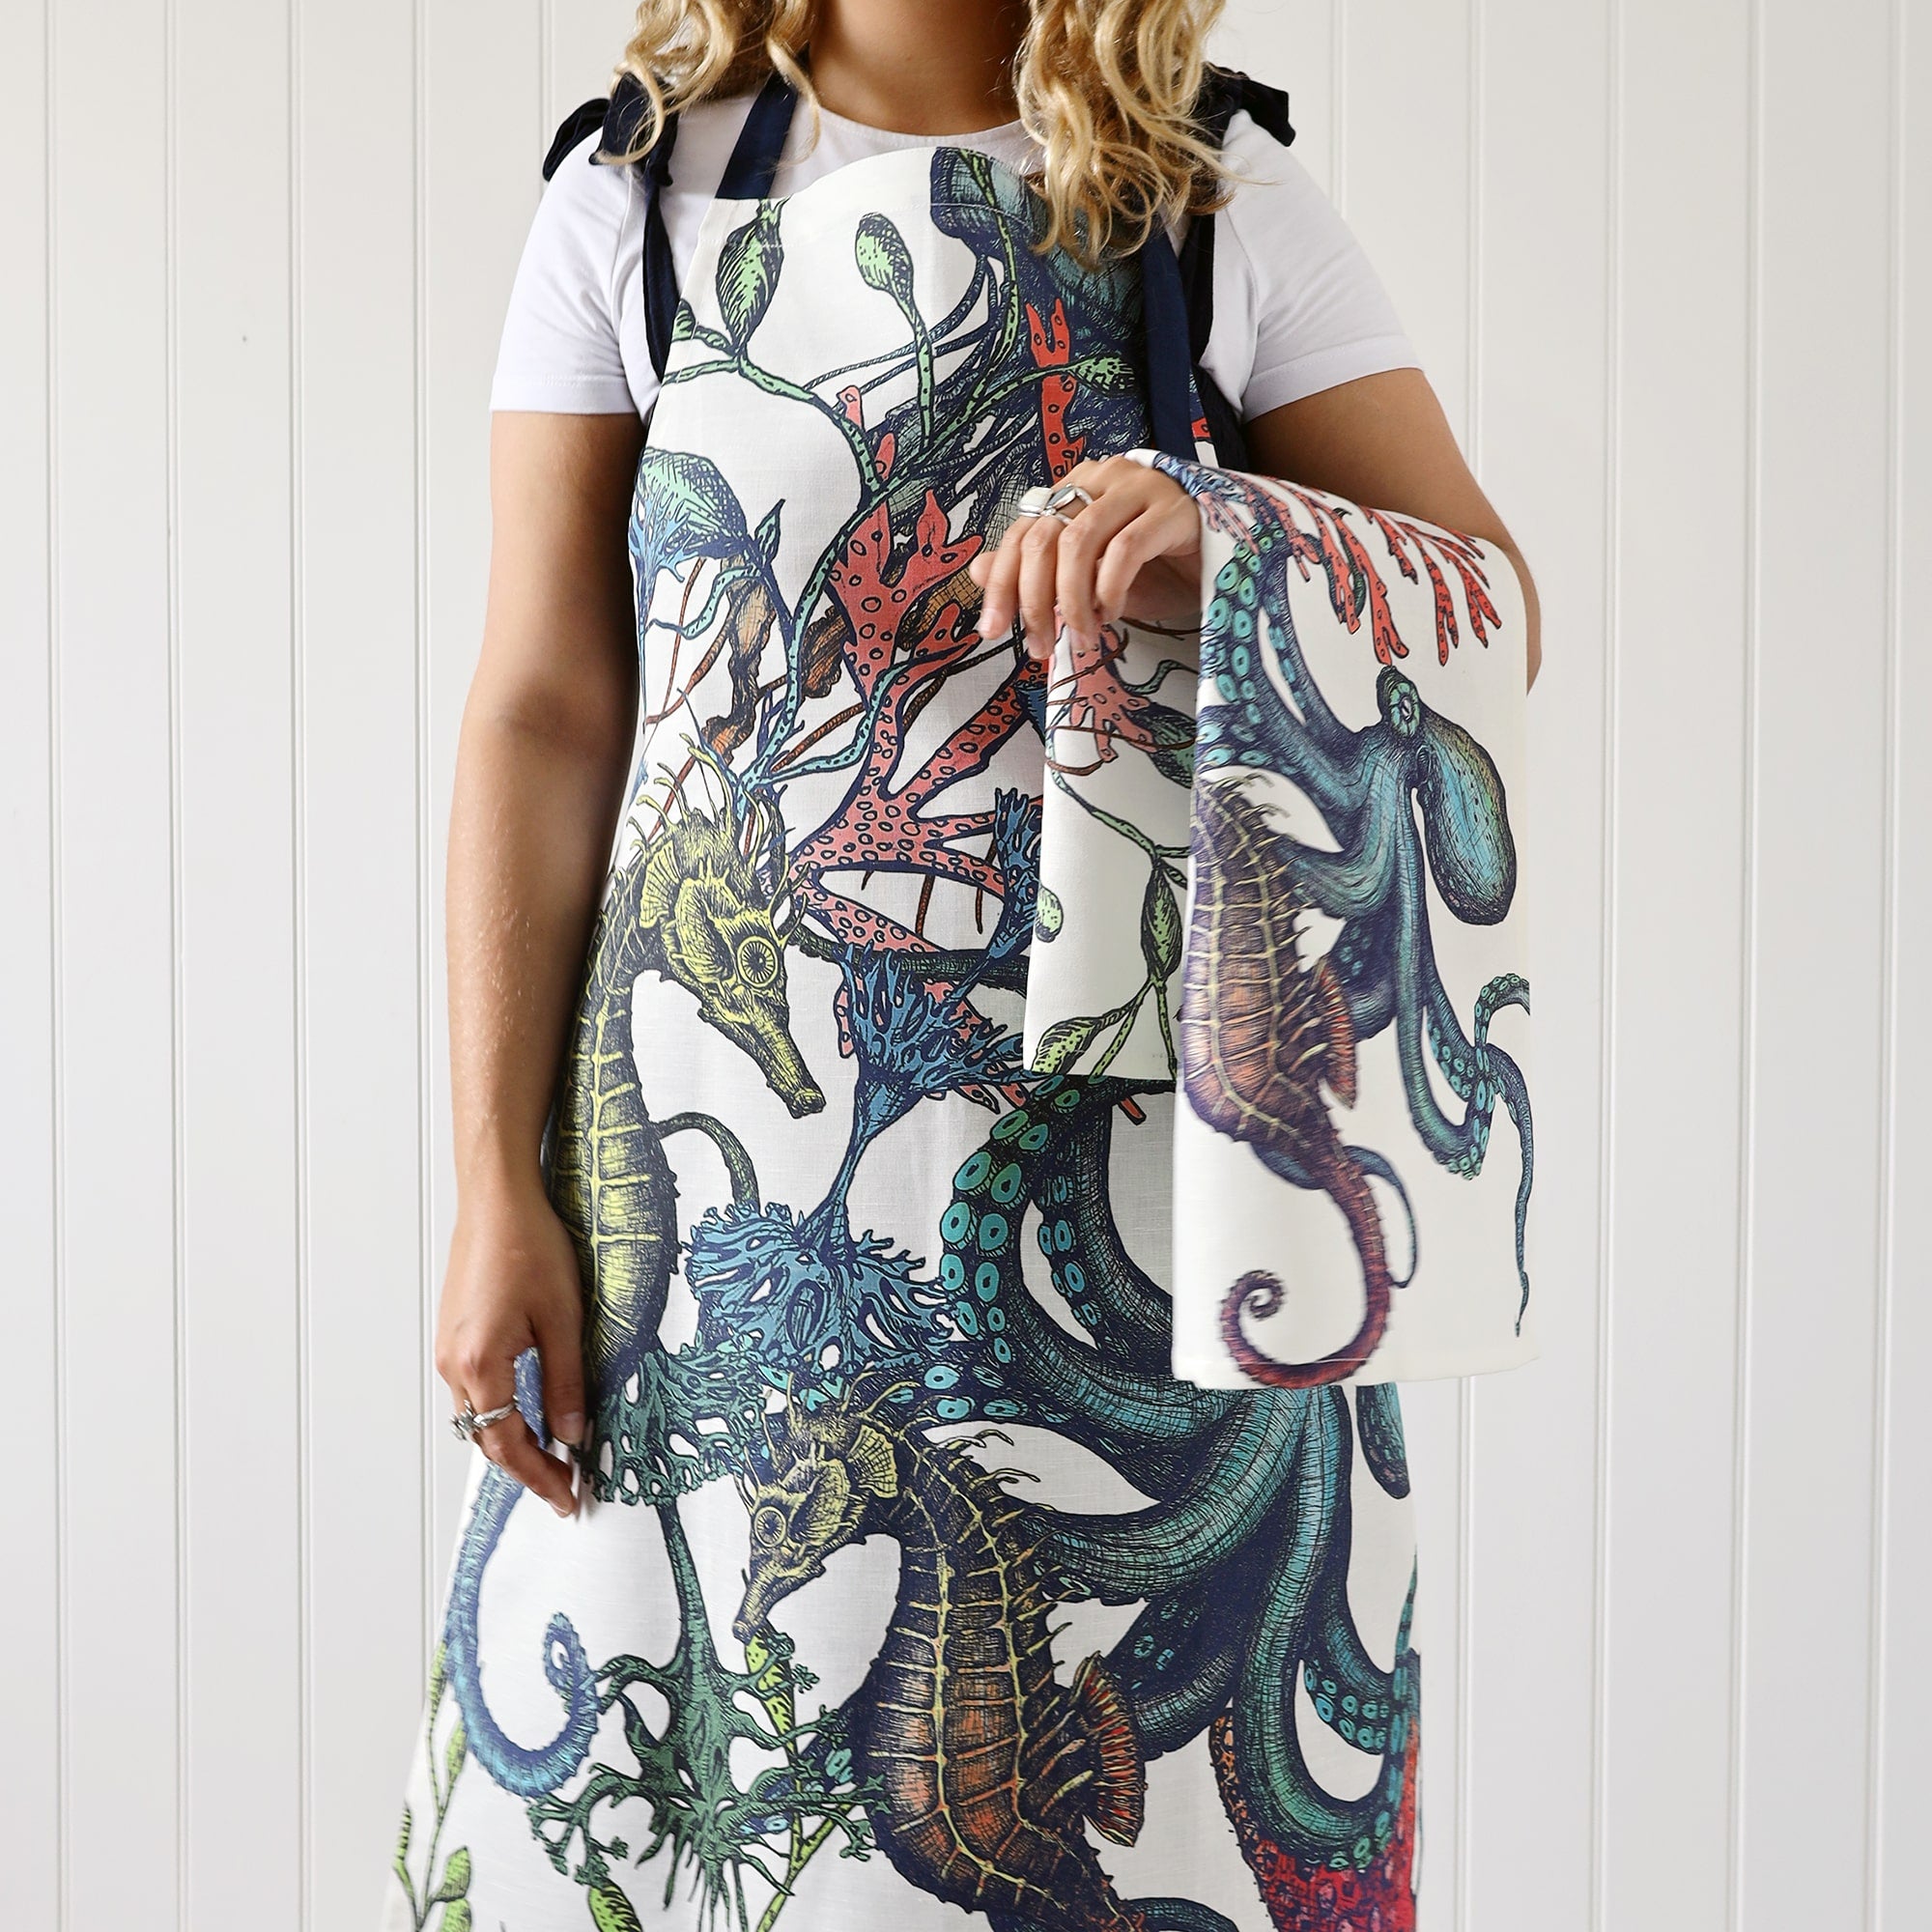 Our reef apron being worn by a model who is also holding a beachcomber tea towel over her arm